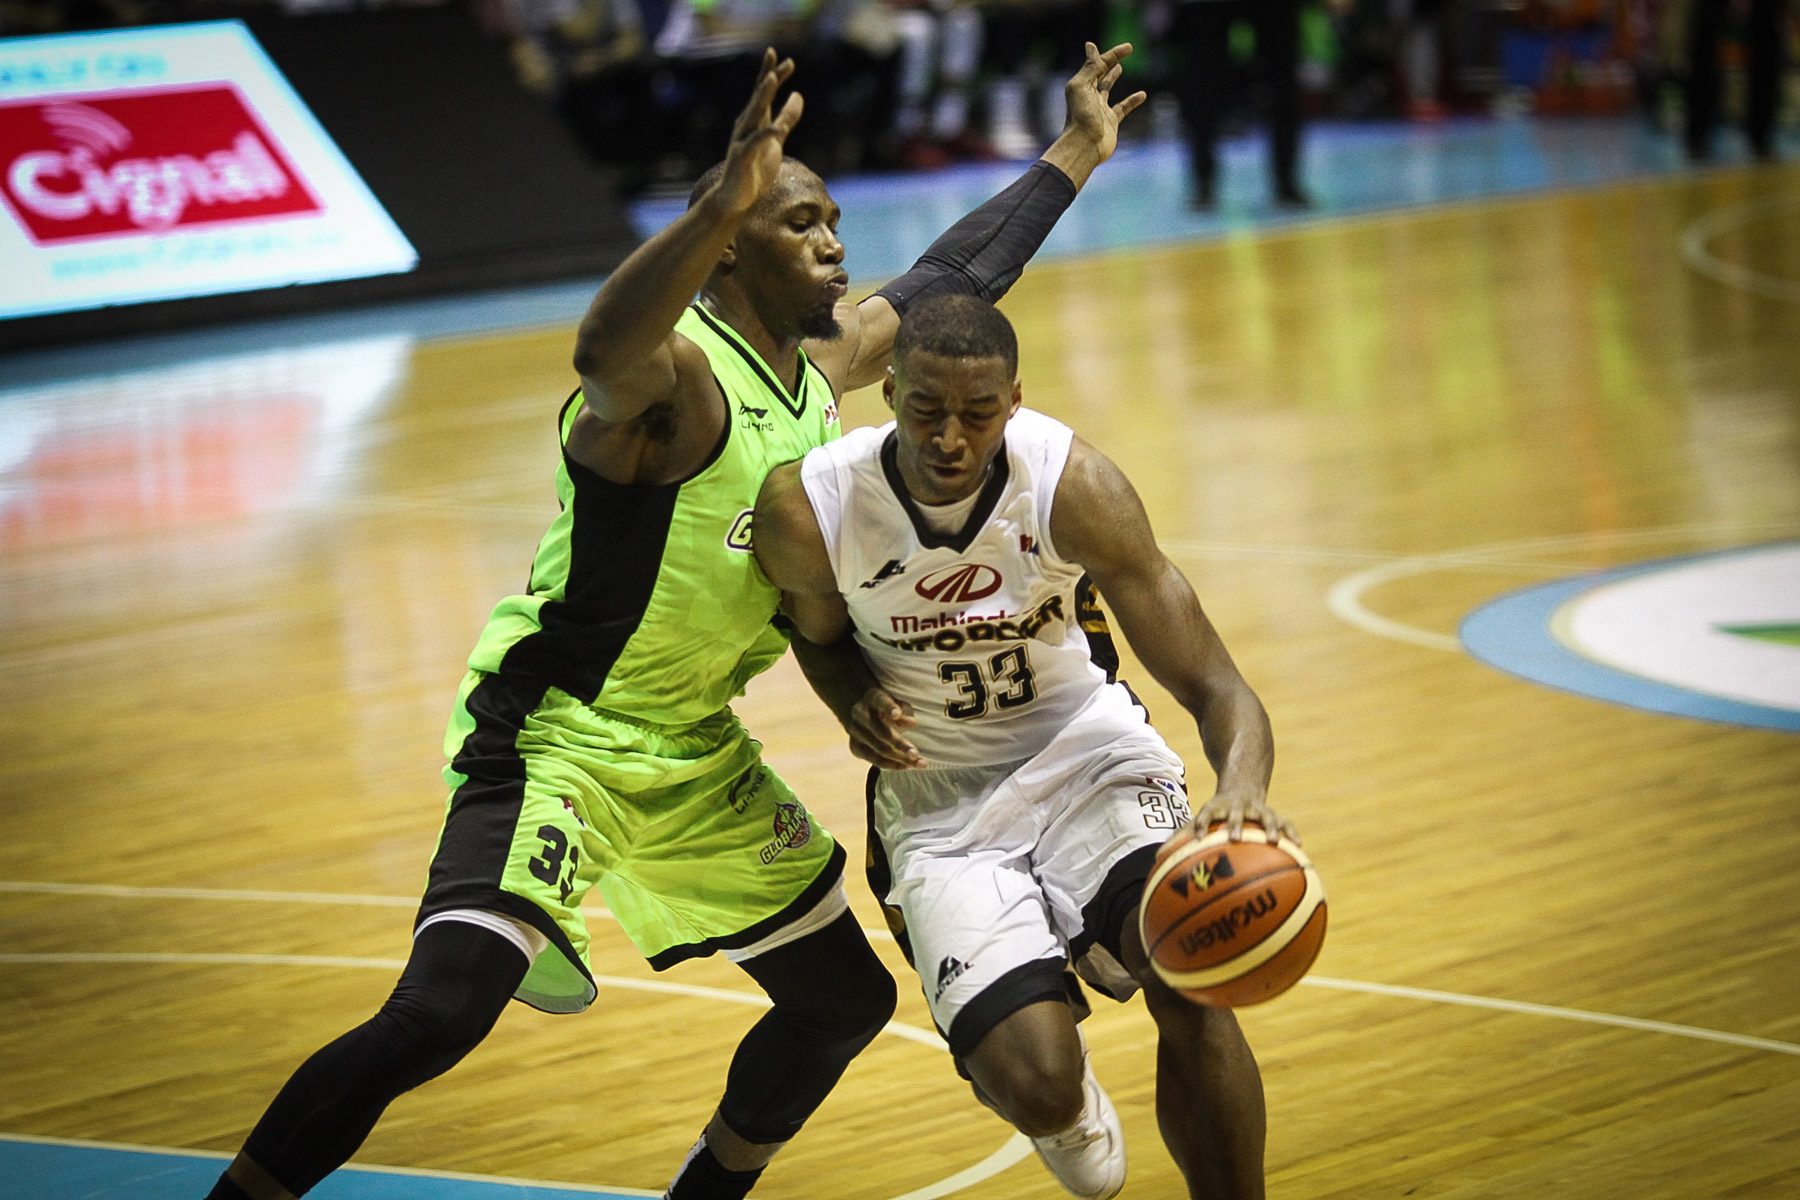 James White, Mahindra’s rookie import, adjusts to life as go-to player